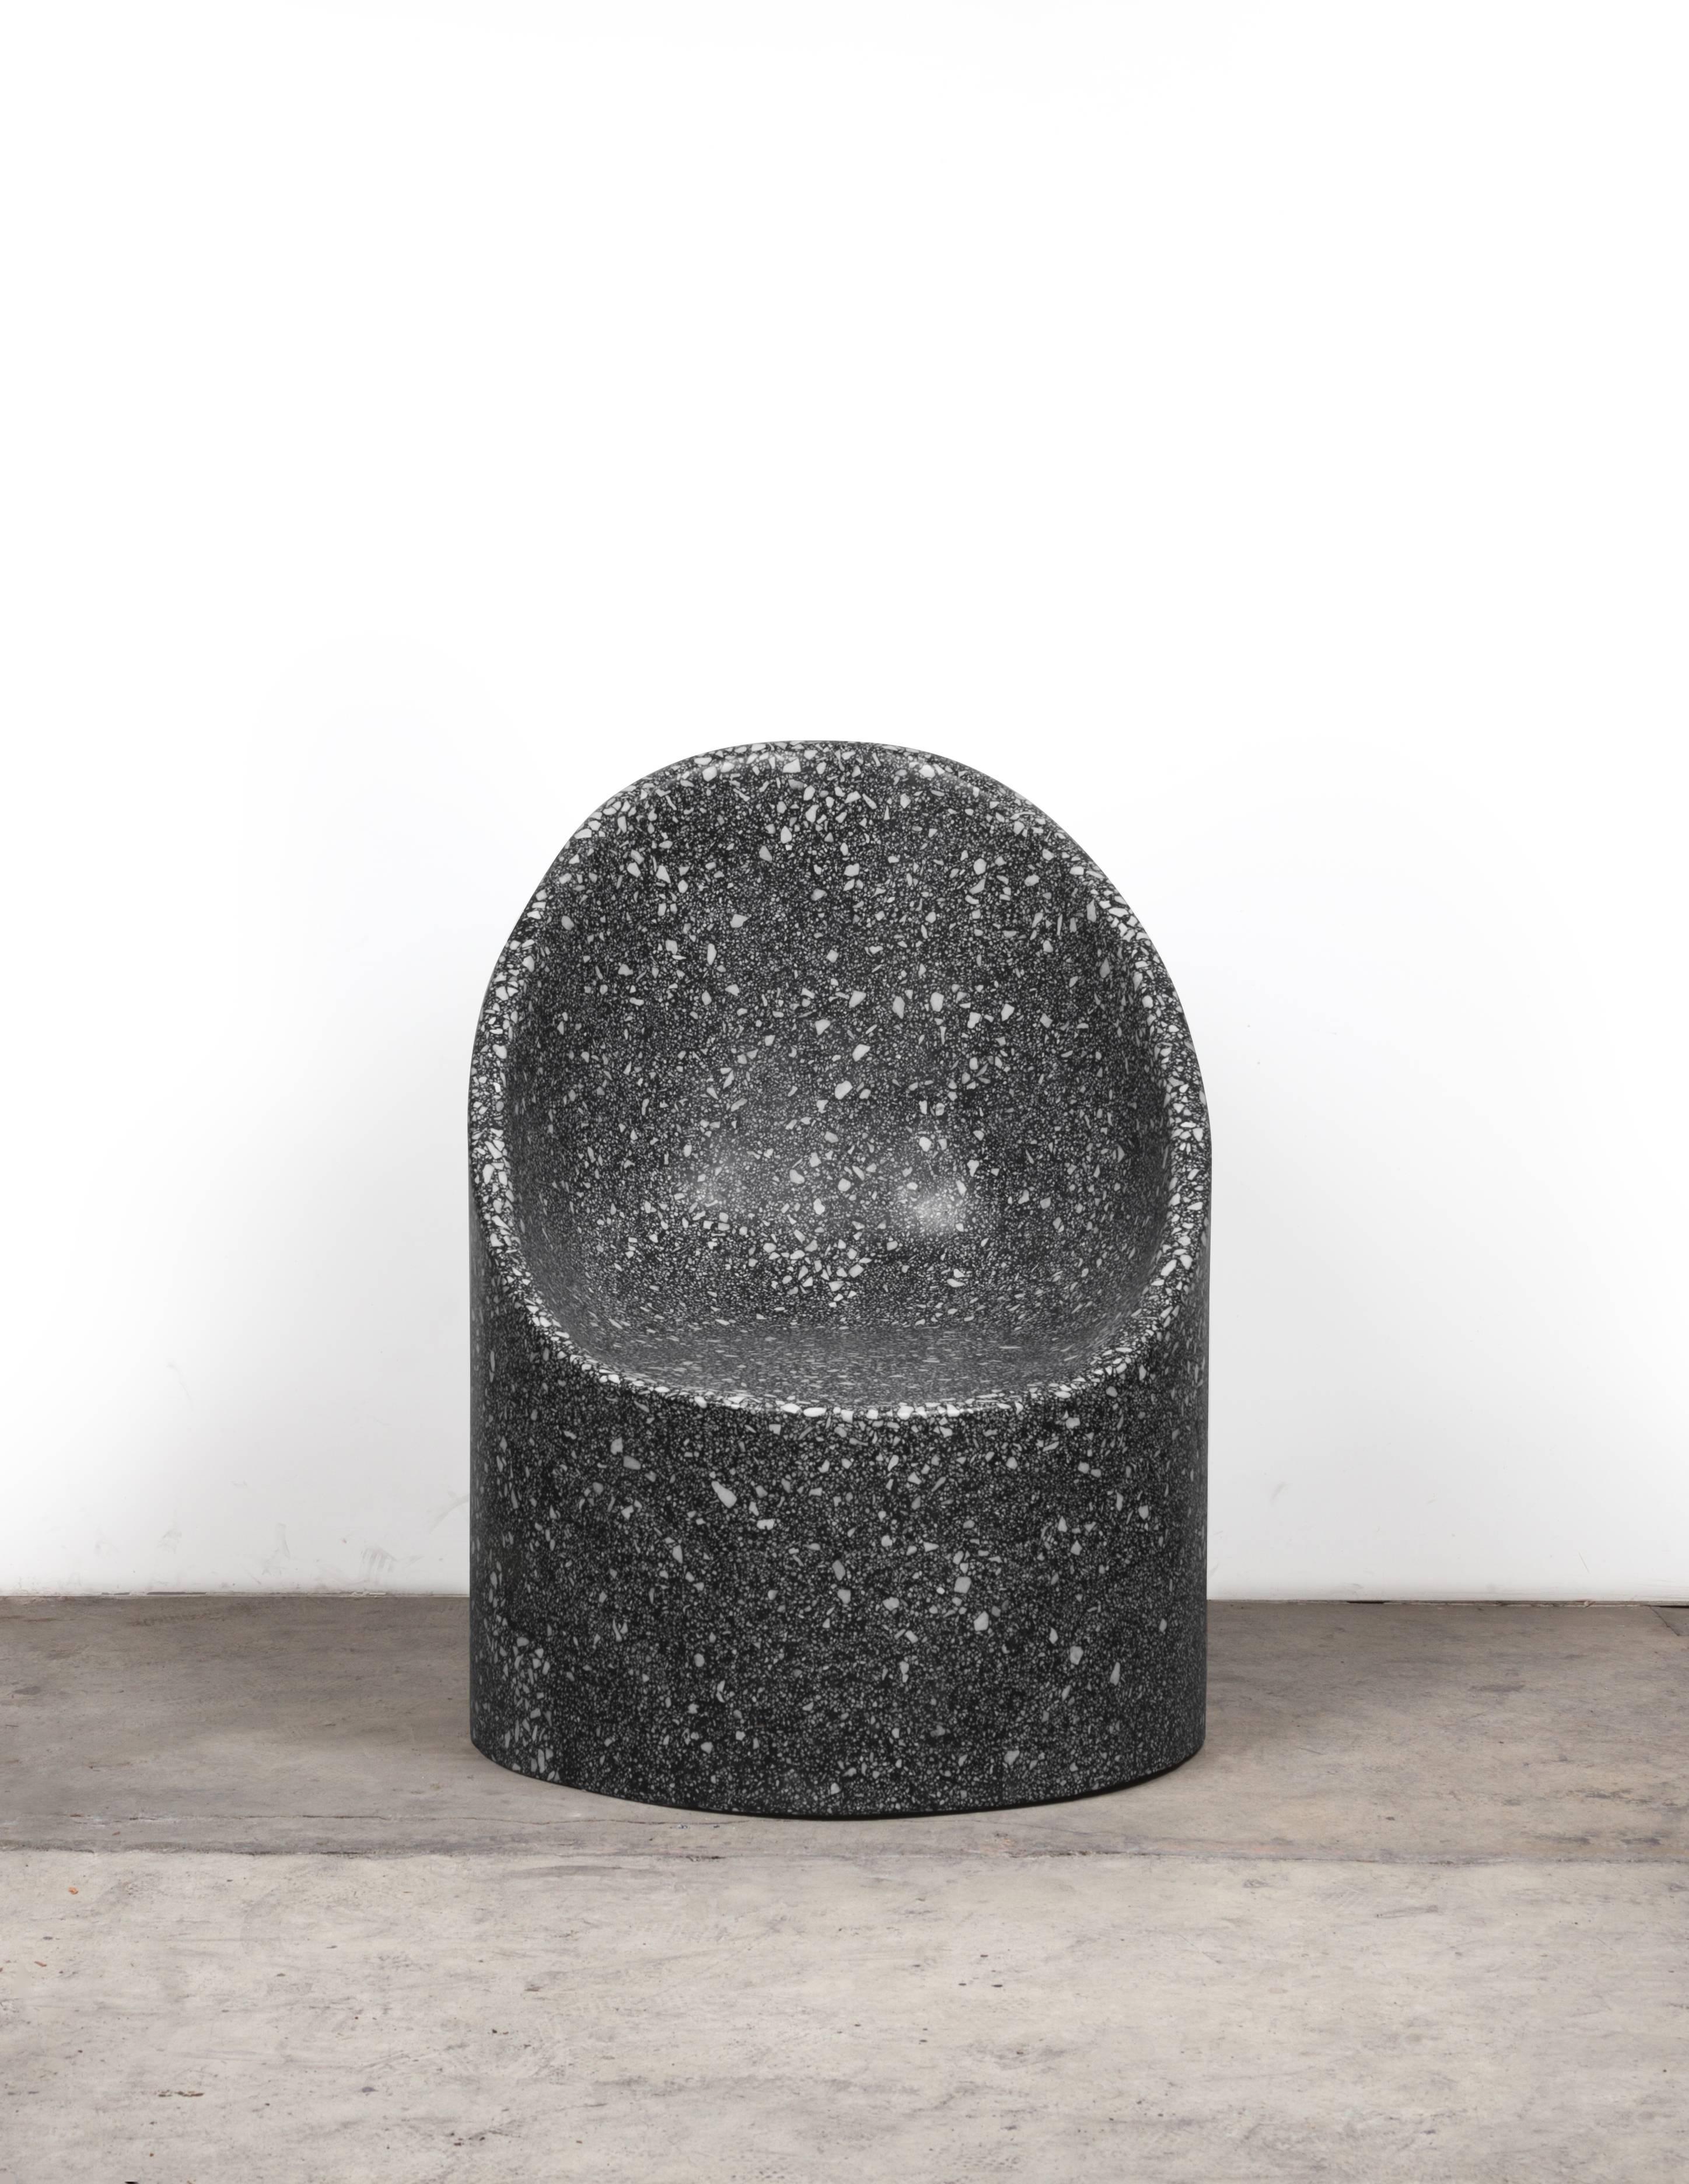 This monumental Cozy Cave chair is shown in black cement with white marble terrazzo. 

Available with and without sheepskin pillows.